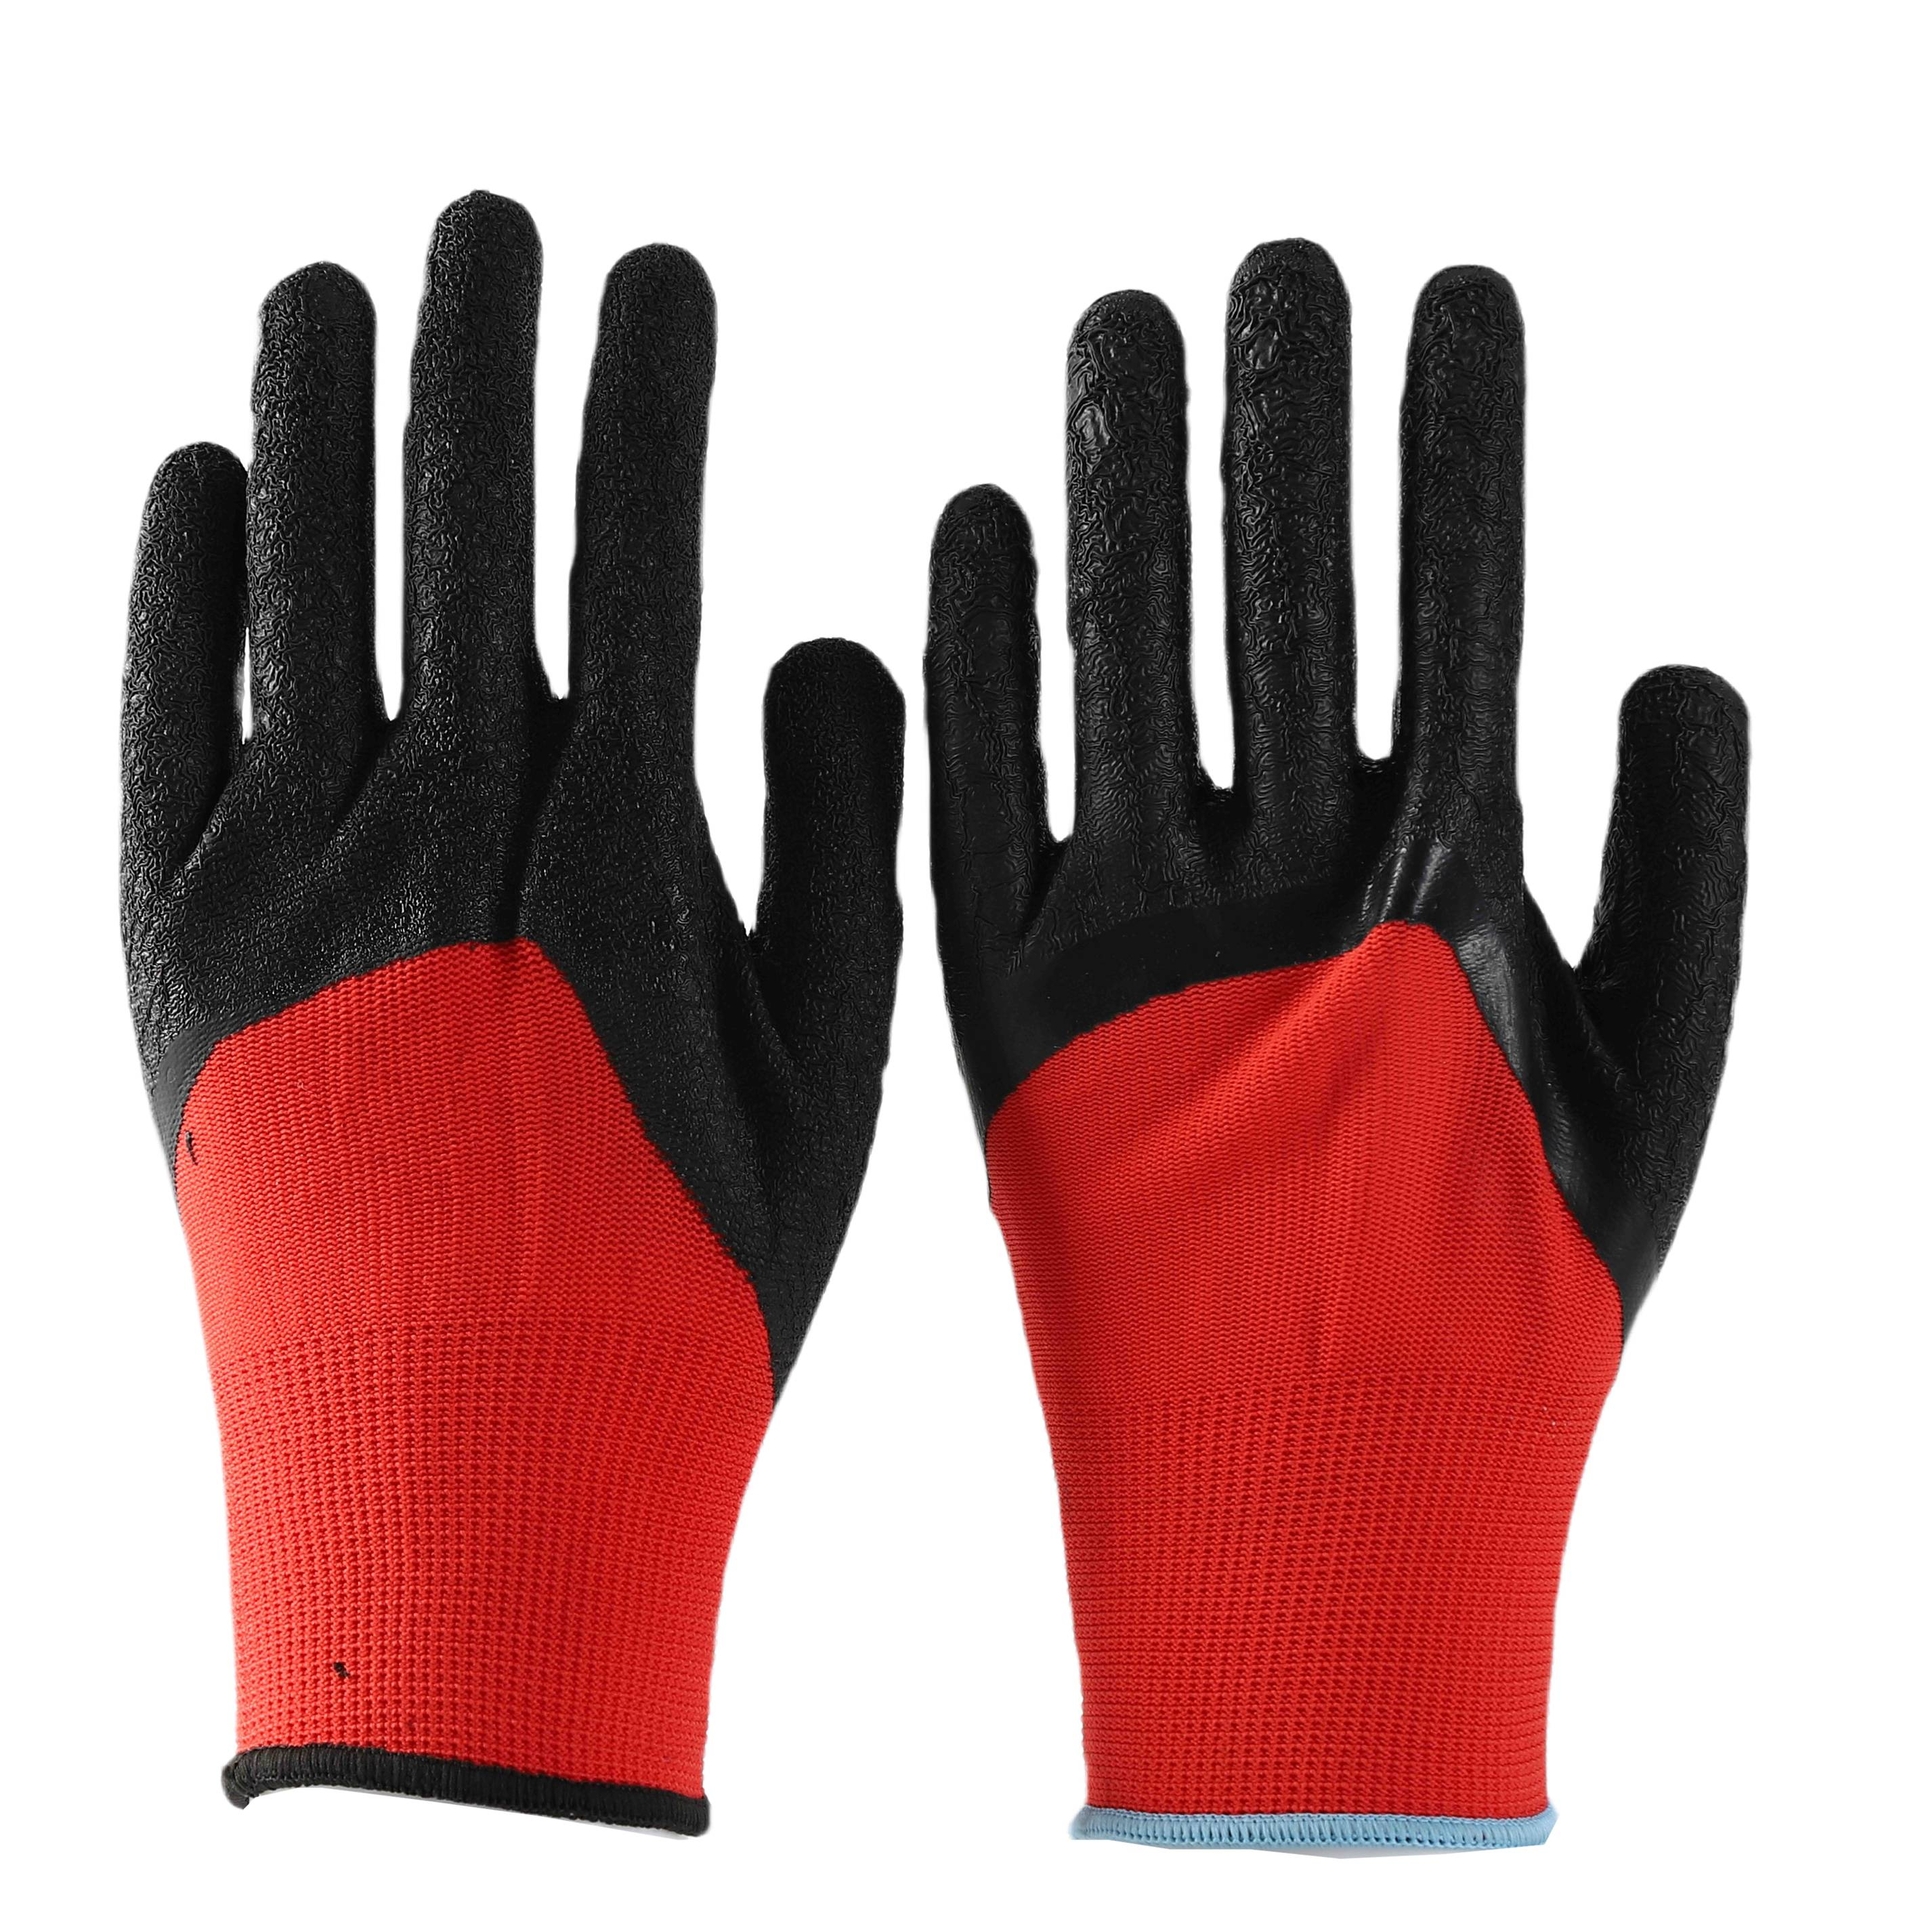                 Red polyester with black crinkle latex half coated gloves            